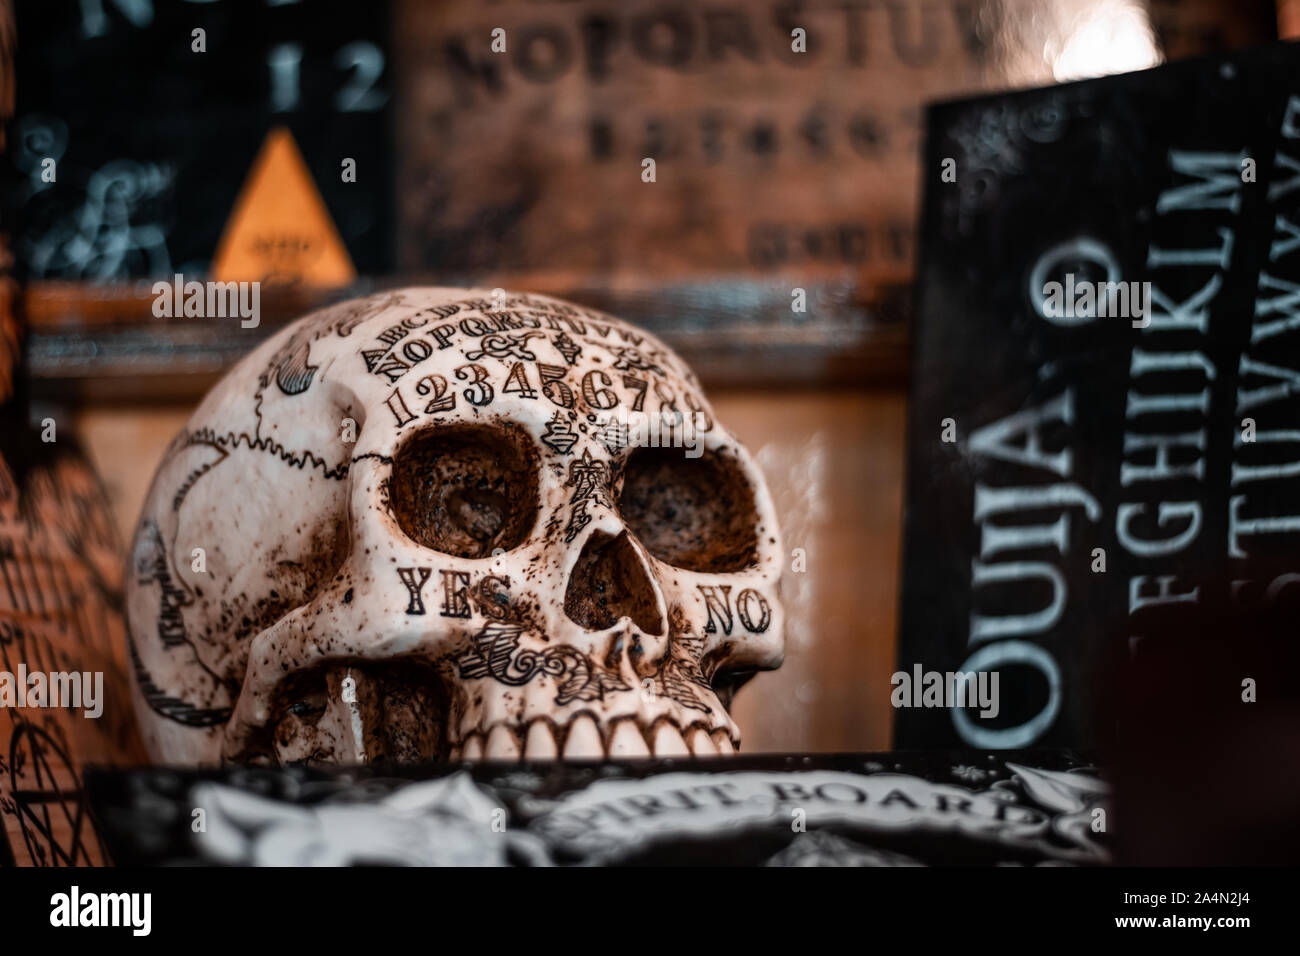 Talking board and planchette, also known as the Ouija board, used for communicating with the dead and other spirits. Halloween background. White skull. Stock Photo